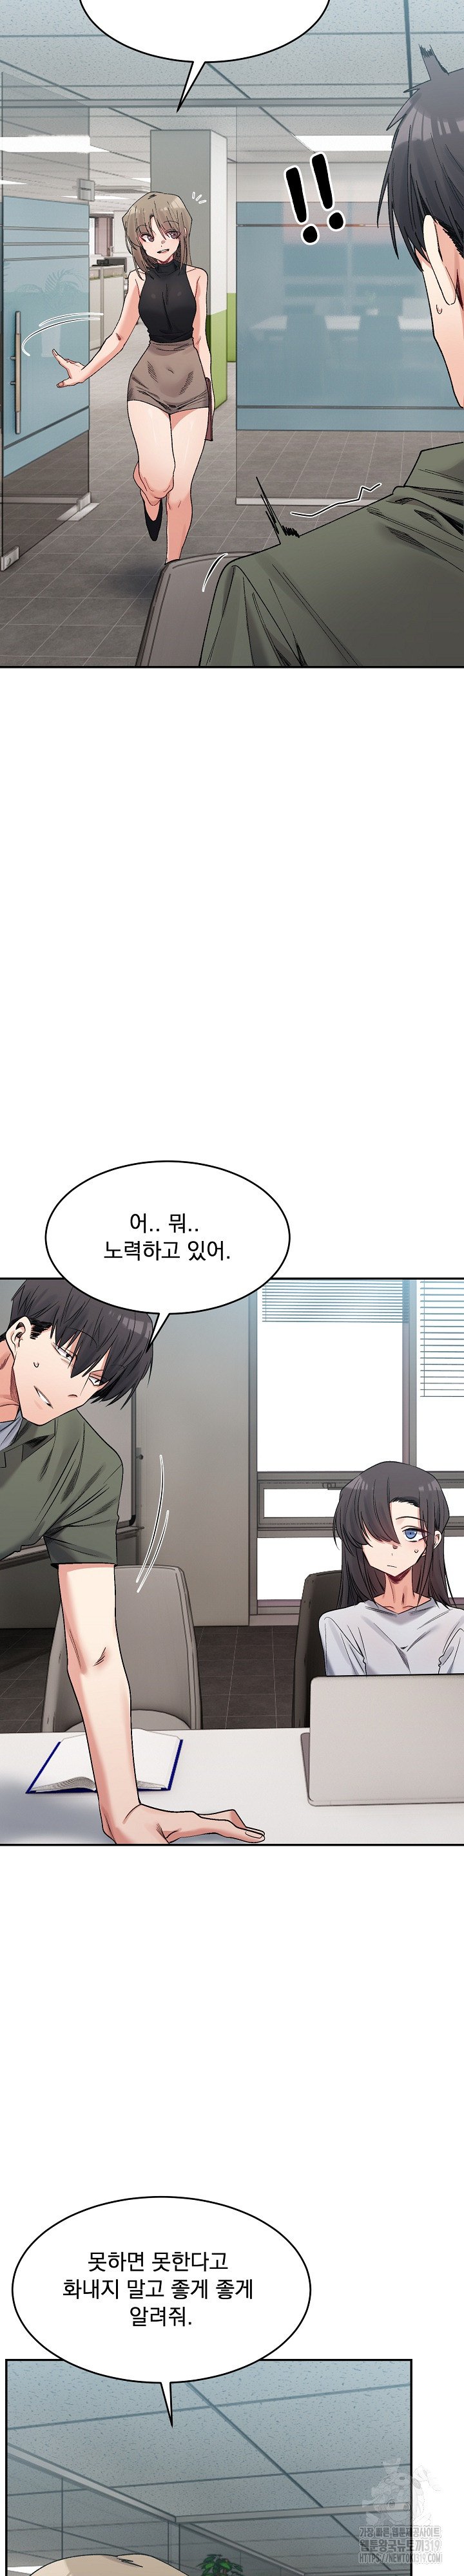 a-delicate-relationship-raw-chap-21-18